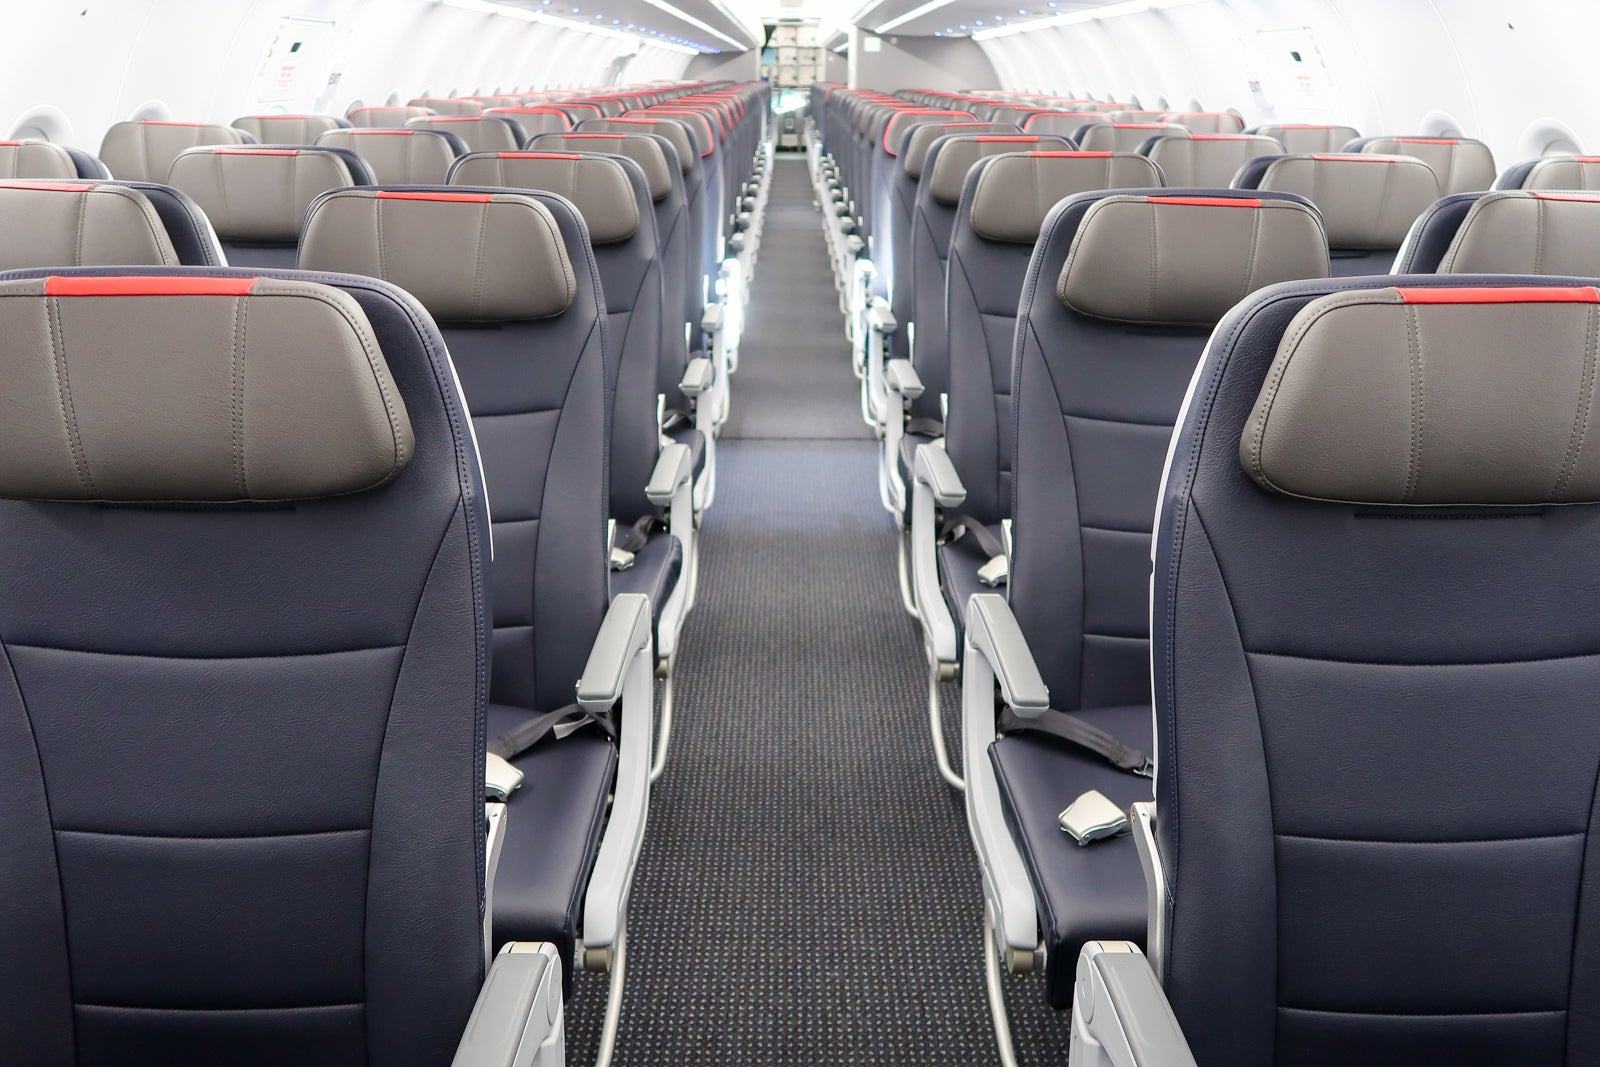 American Airlines A321 Interior